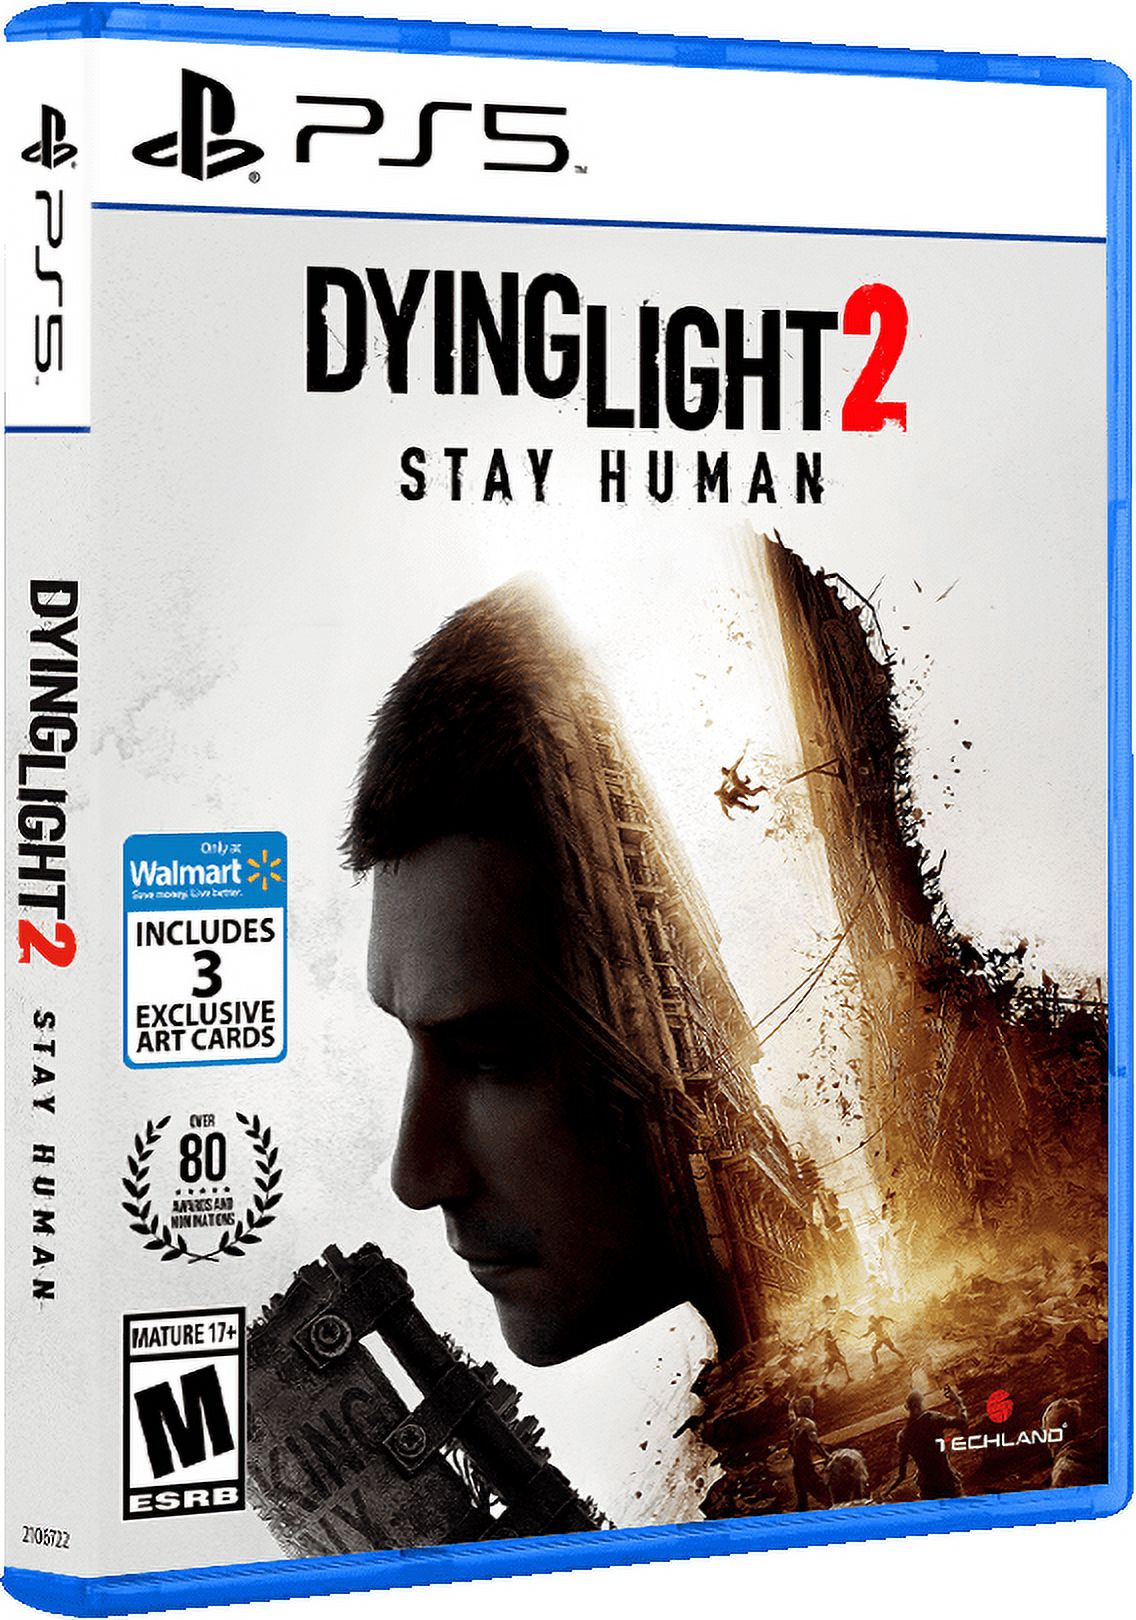 Dying Light 2 Stay Human: Walmart Exclusive - PlayStation 5 - image 1 of 9